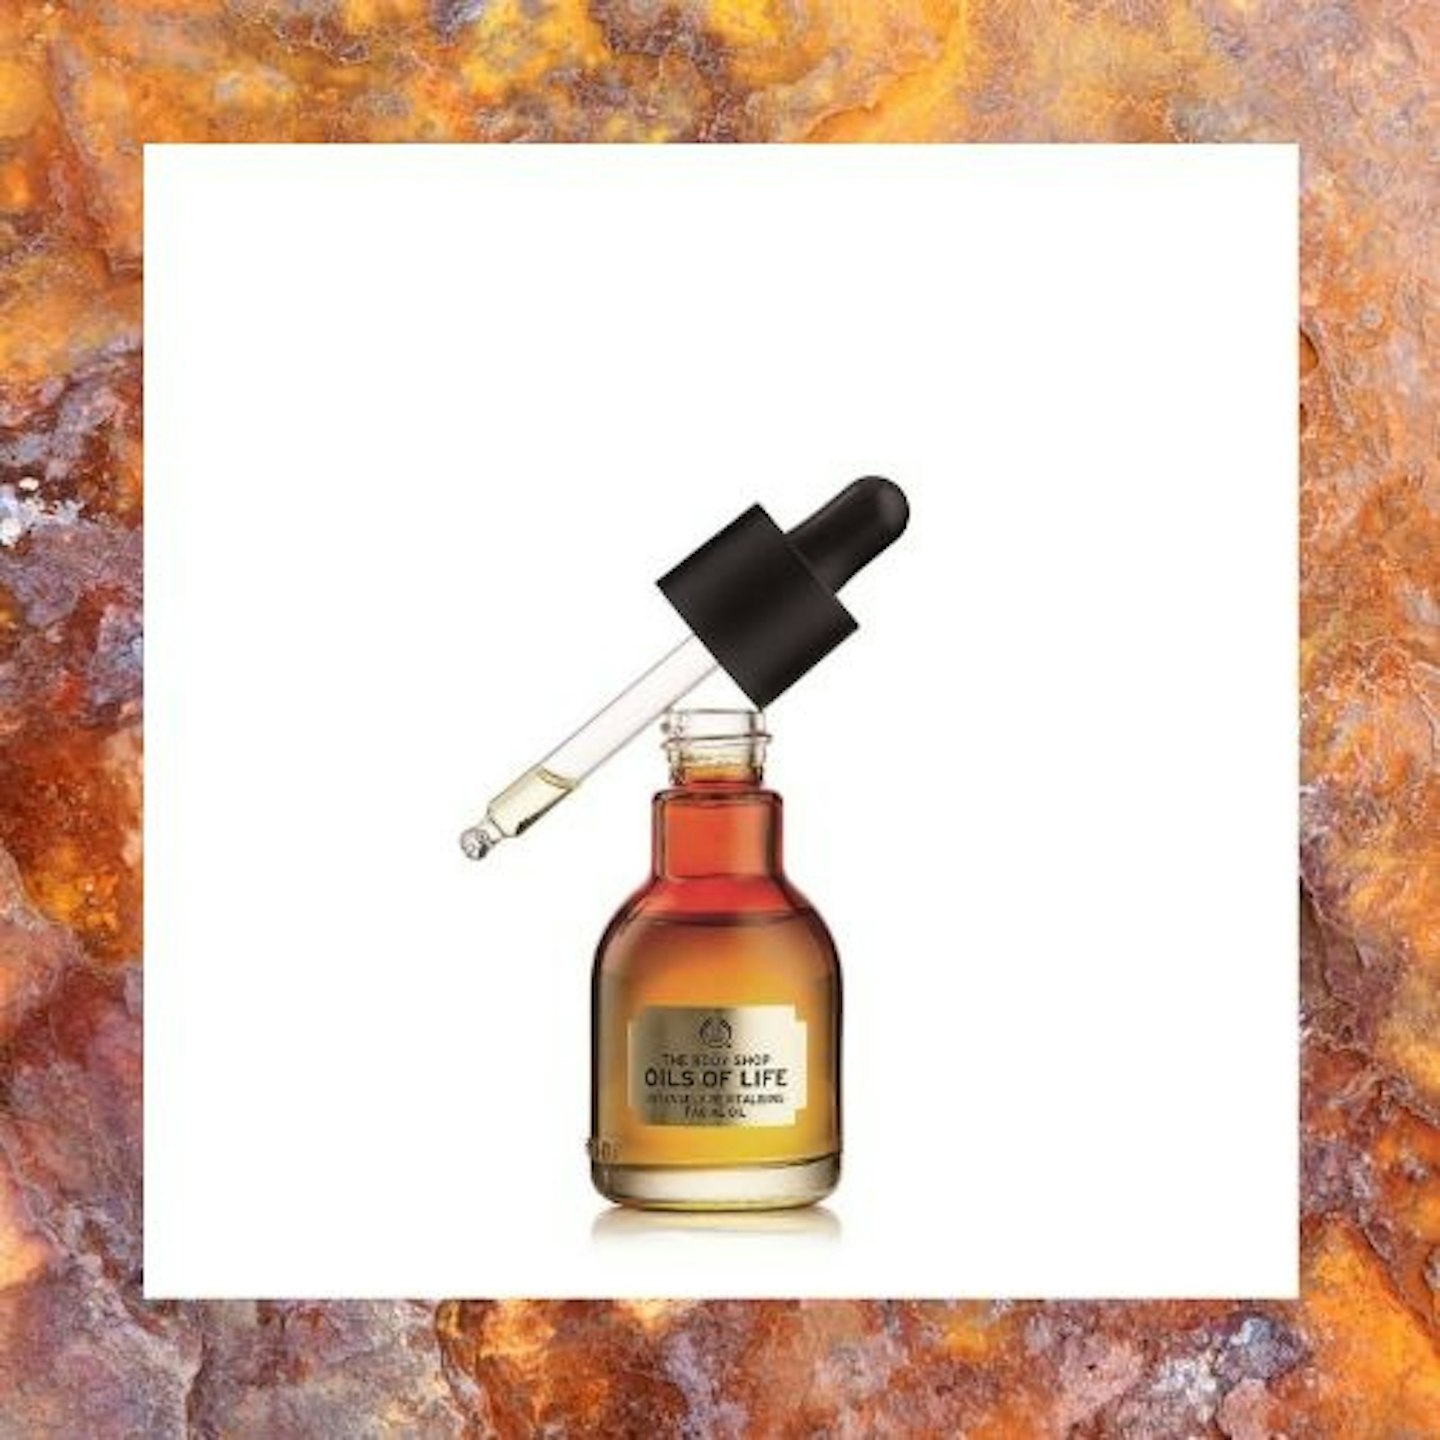 The Body Shop Oils of Life Intensely Revitalising Facial Oil, 30ml